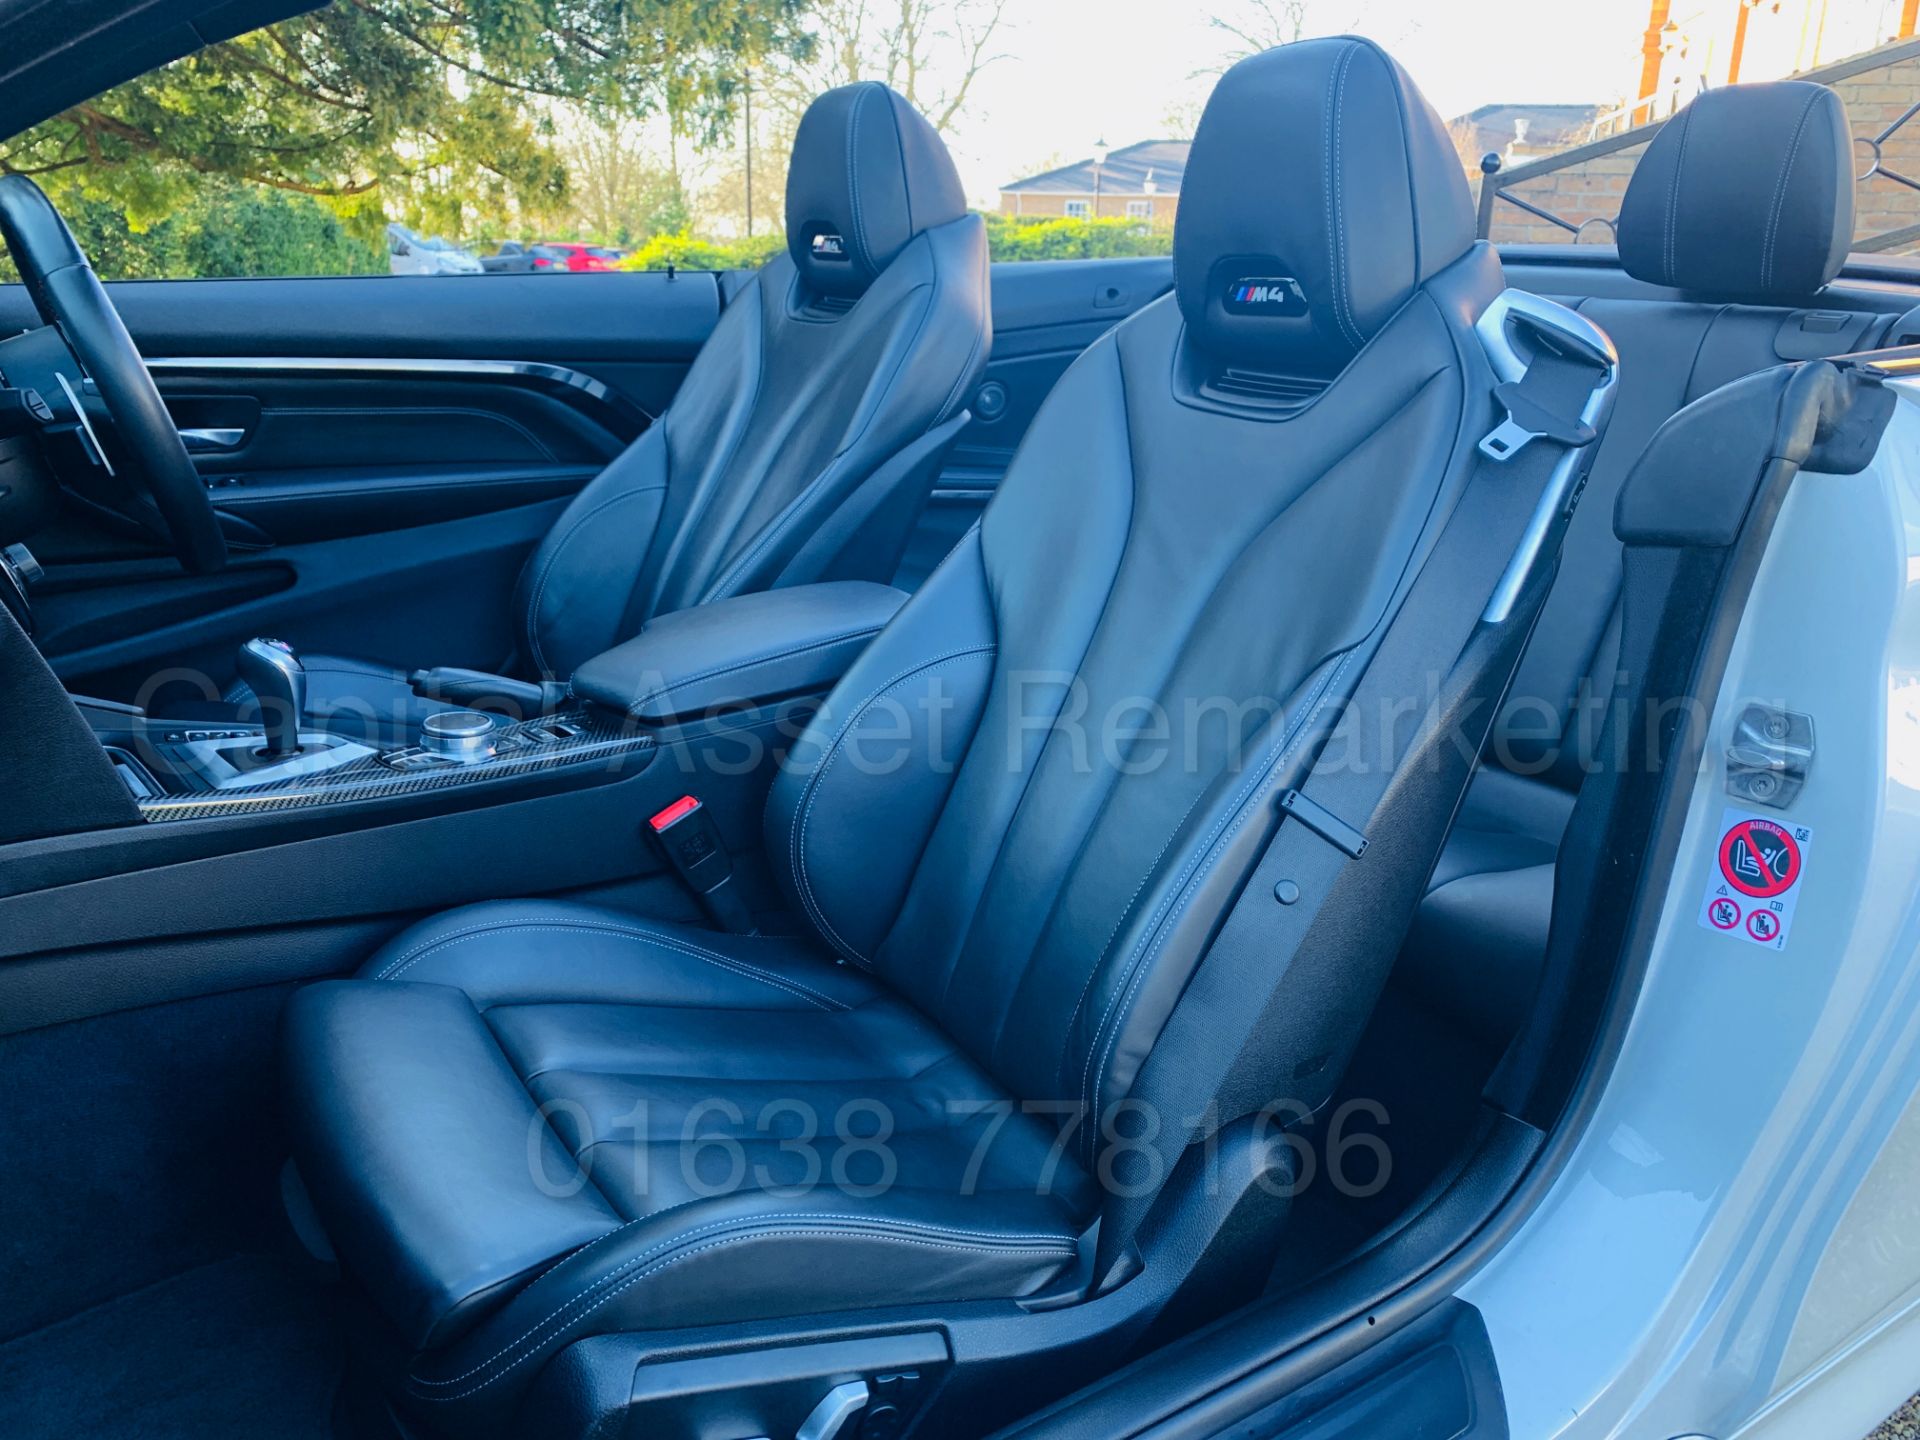 ON SALE BMW M4 CONVERTIBLE *COMPETITION PACKAGE* (2018 MODEL) '431 BHP - M DCT AUTO' WOW!!!!! - Image 48 of 89